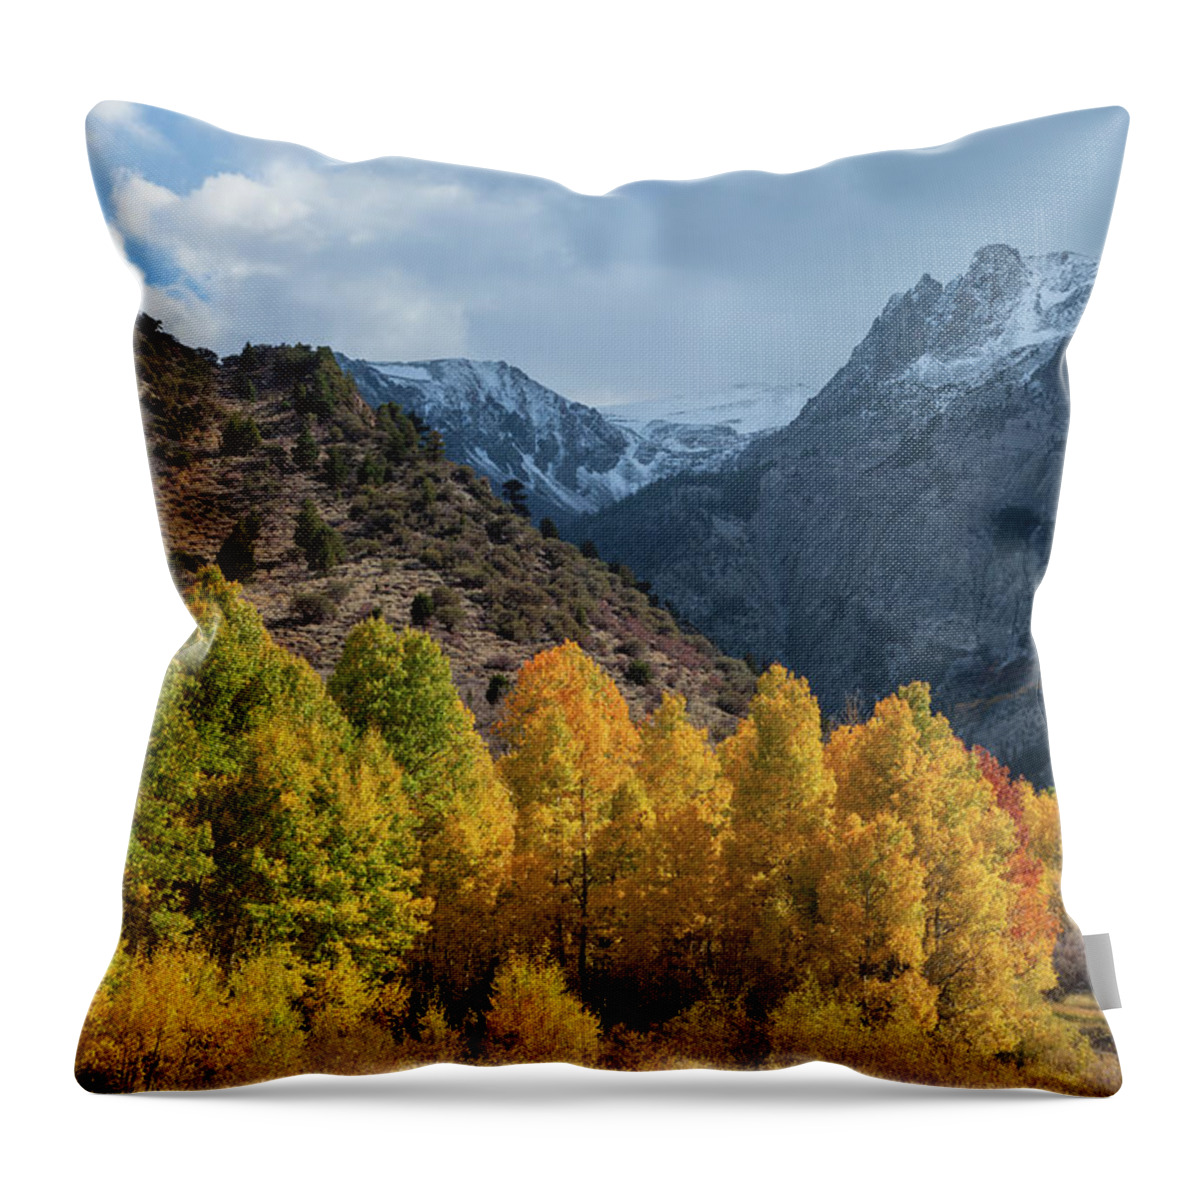 Trees Throw Pillow featuring the photograph Aspen Trees In Autumn by Jonathan Nguyen